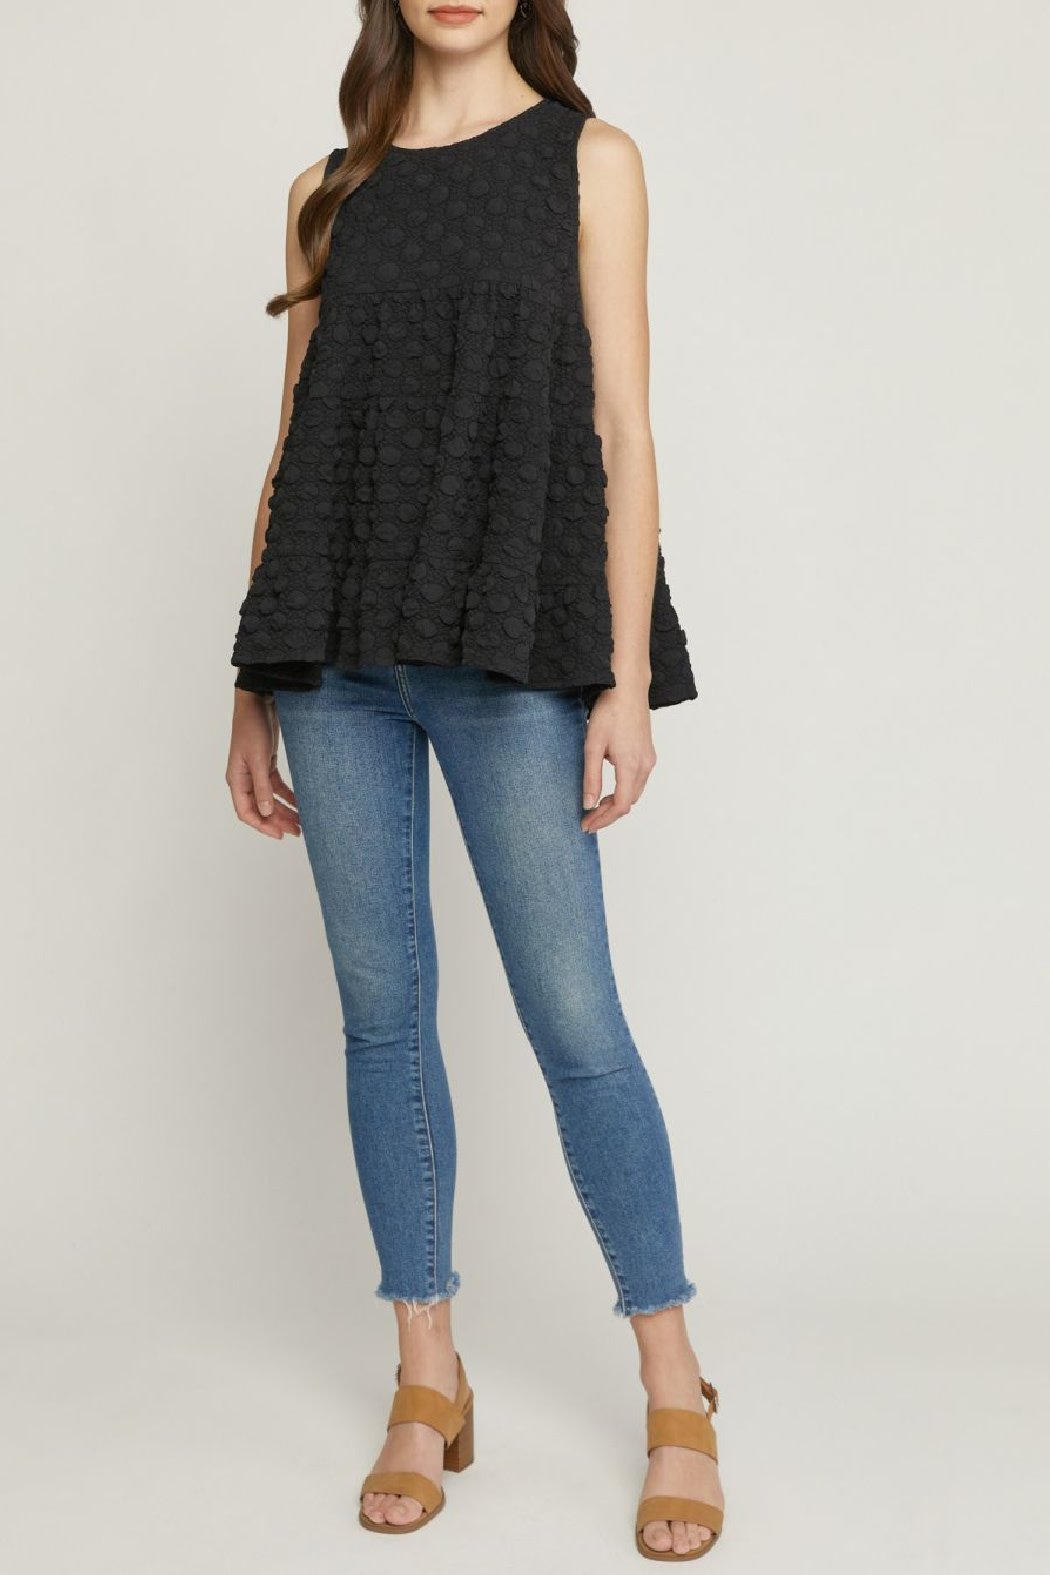 Entro Textured tiered top